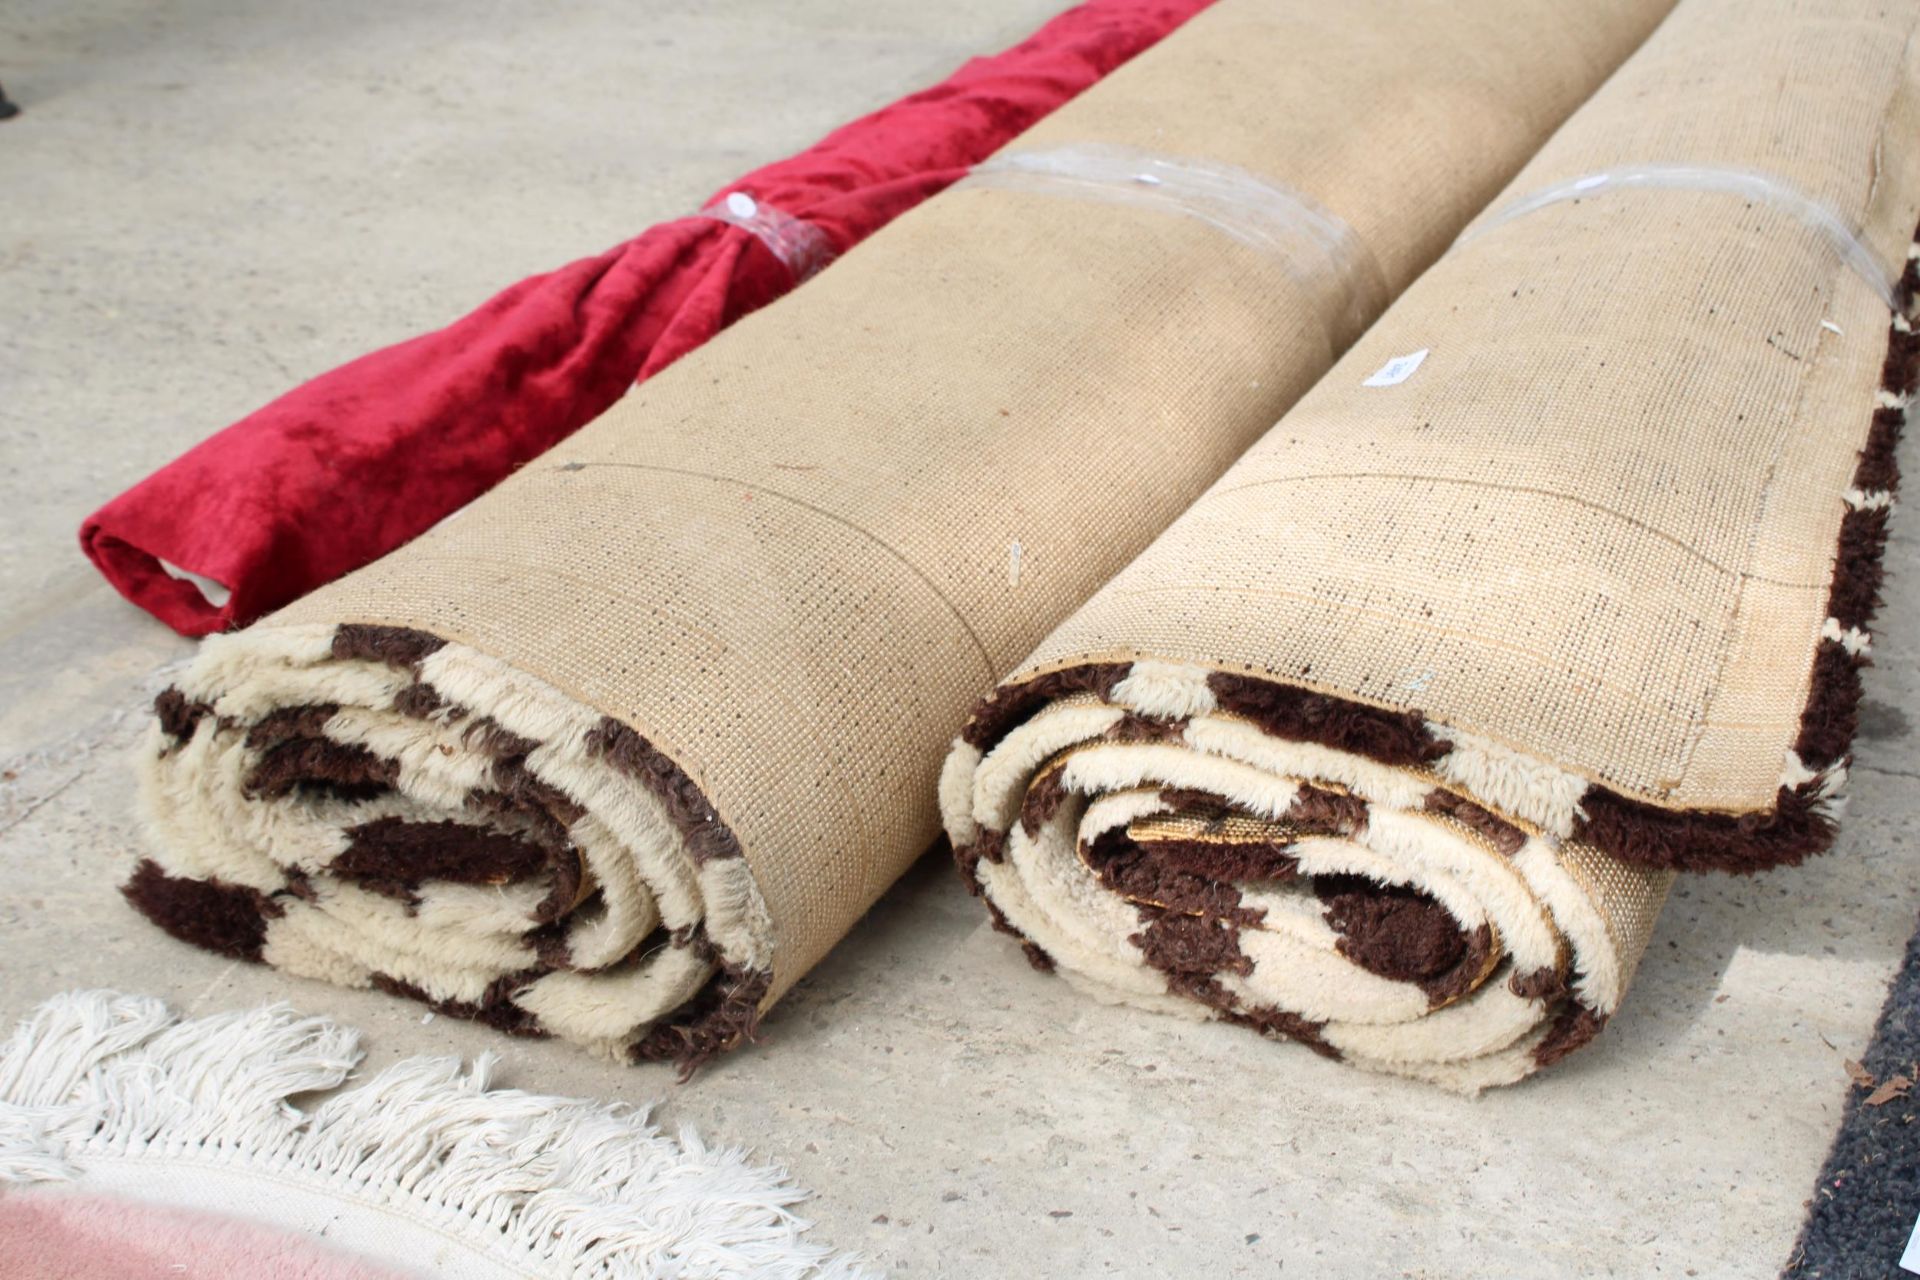 TWO LARGE BROWN PATTERNED RUGS AND A ROLL OF MATERIAL - Bild 3 aus 3